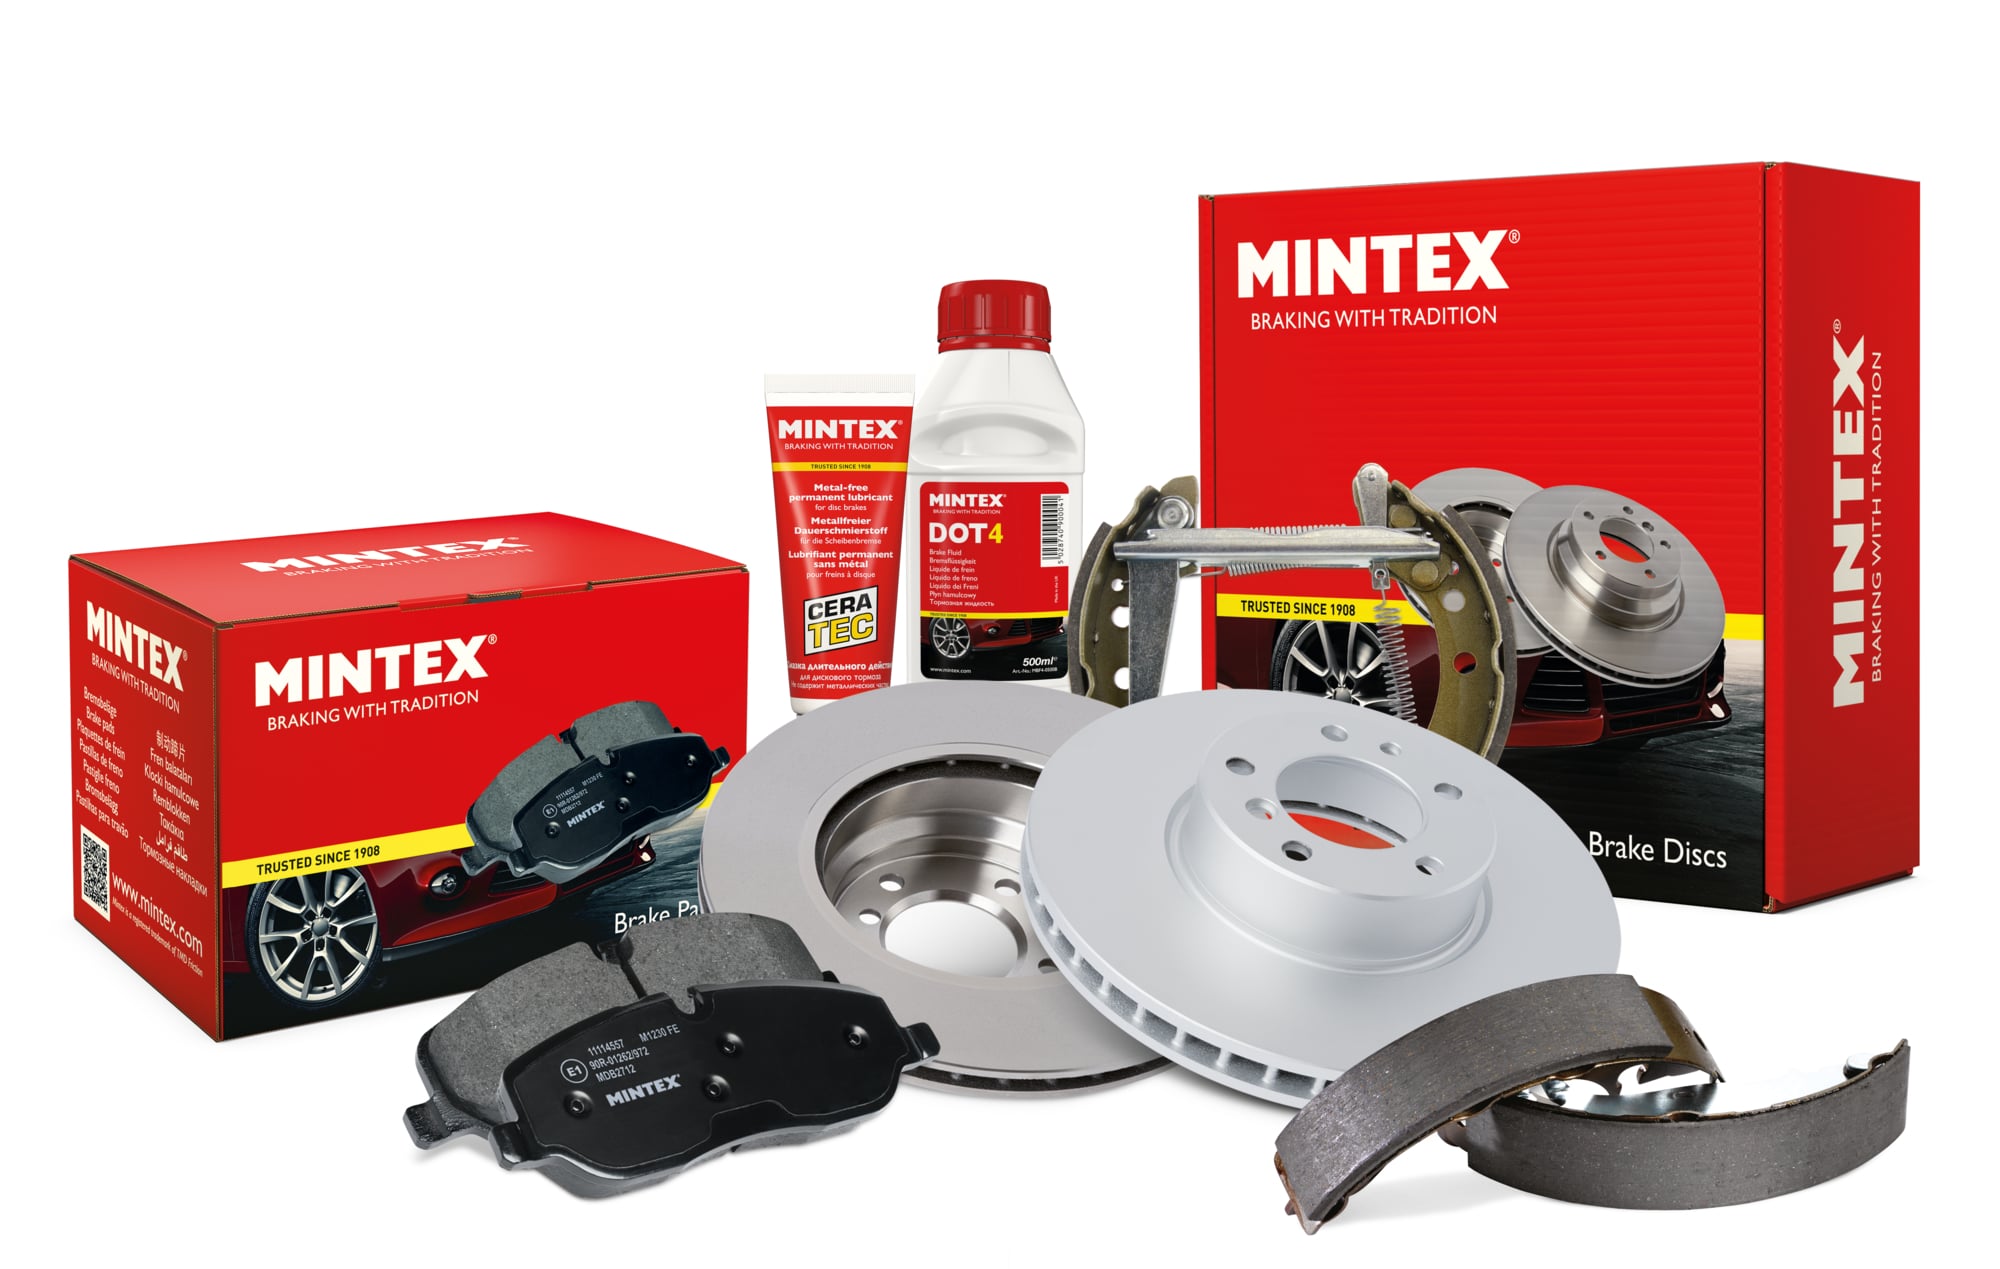 Mintex added new brake pads and discs